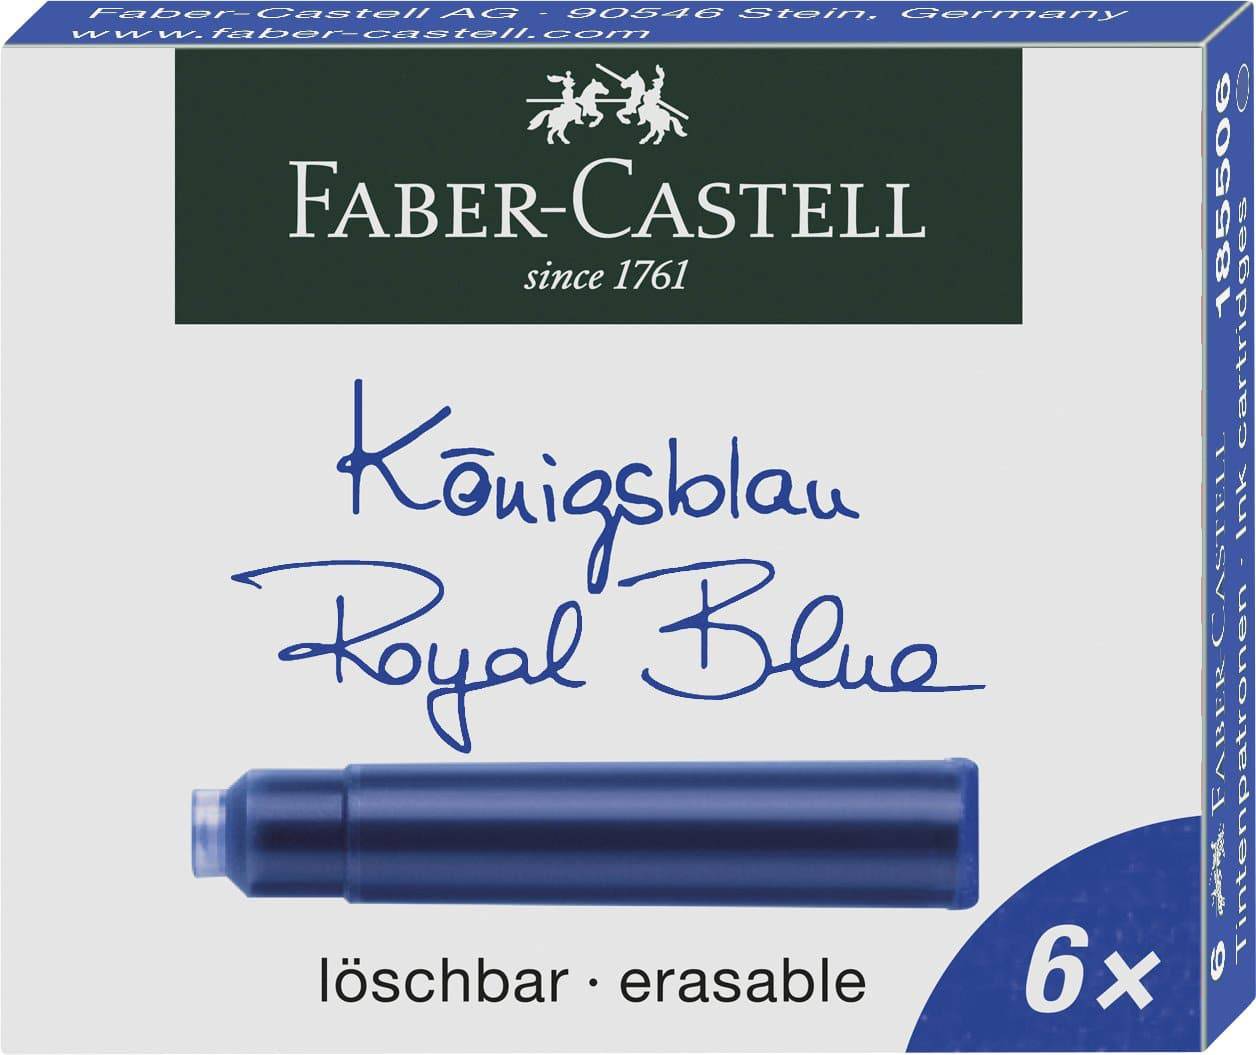 Faber Castell Ink Cartridge Box of 6 - Blesket Canada